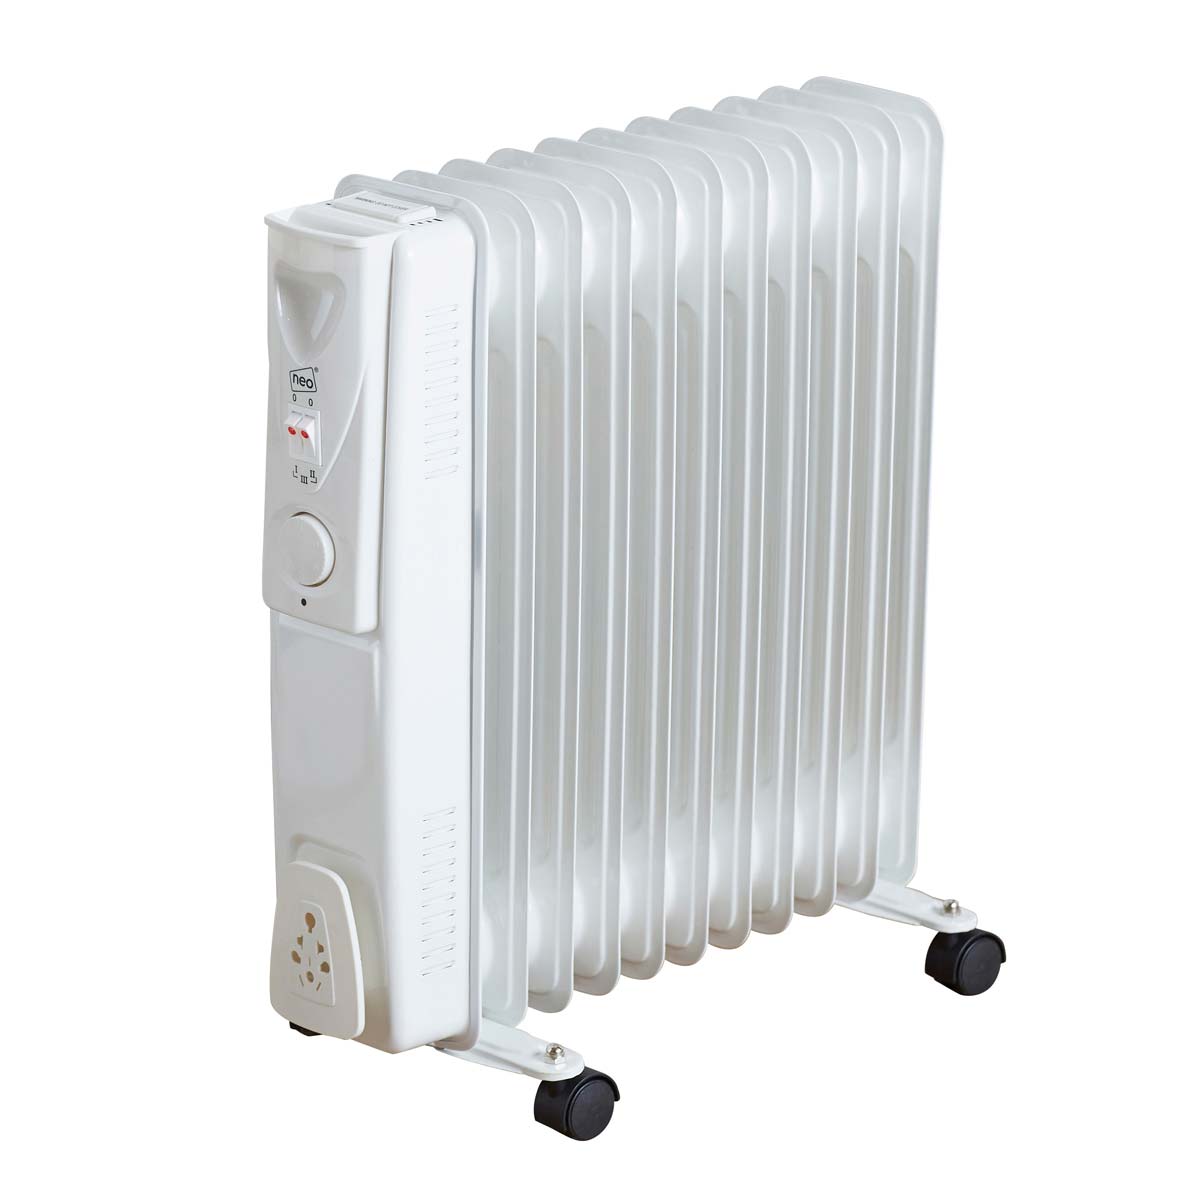 Neo Direct Neo 11 Fin 2.5kW White Electric Oil Filled Radiator